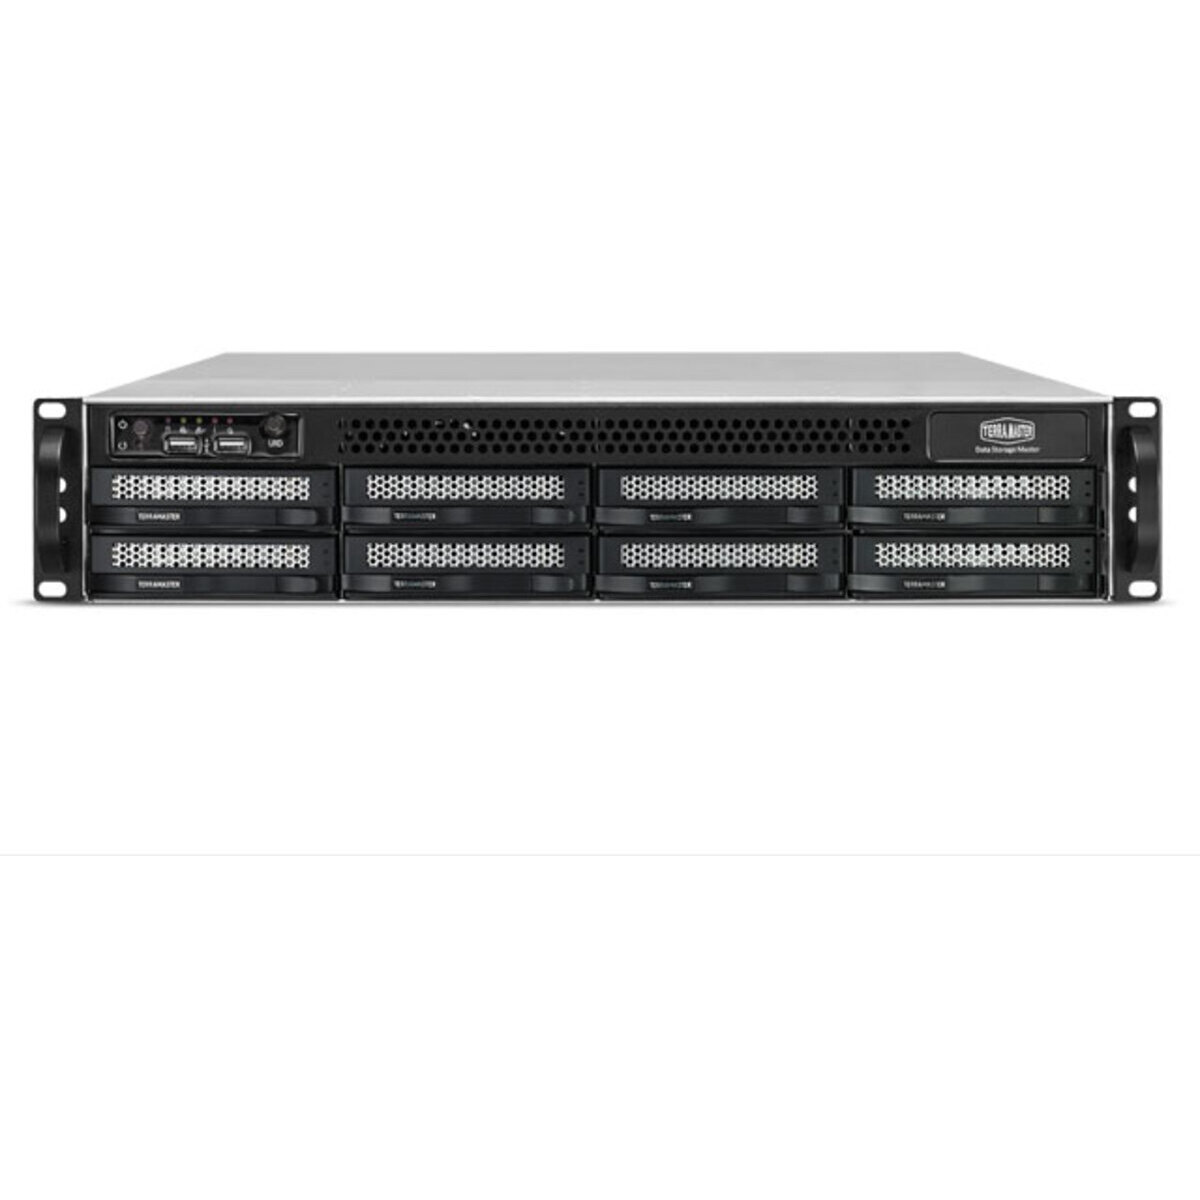 TerraMaster U8-722-2224 2tb 8-Bay RackMount Large Business / Enterprise NAS - Network Attached Storage Device 4x500gb Samsung 870 EVO MZ-77E500BAM 2.5 560/530MB/s SATA 6Gb/s SSD CONSUMER Class Drives Installed - Burn-In Tested U8-722-2224